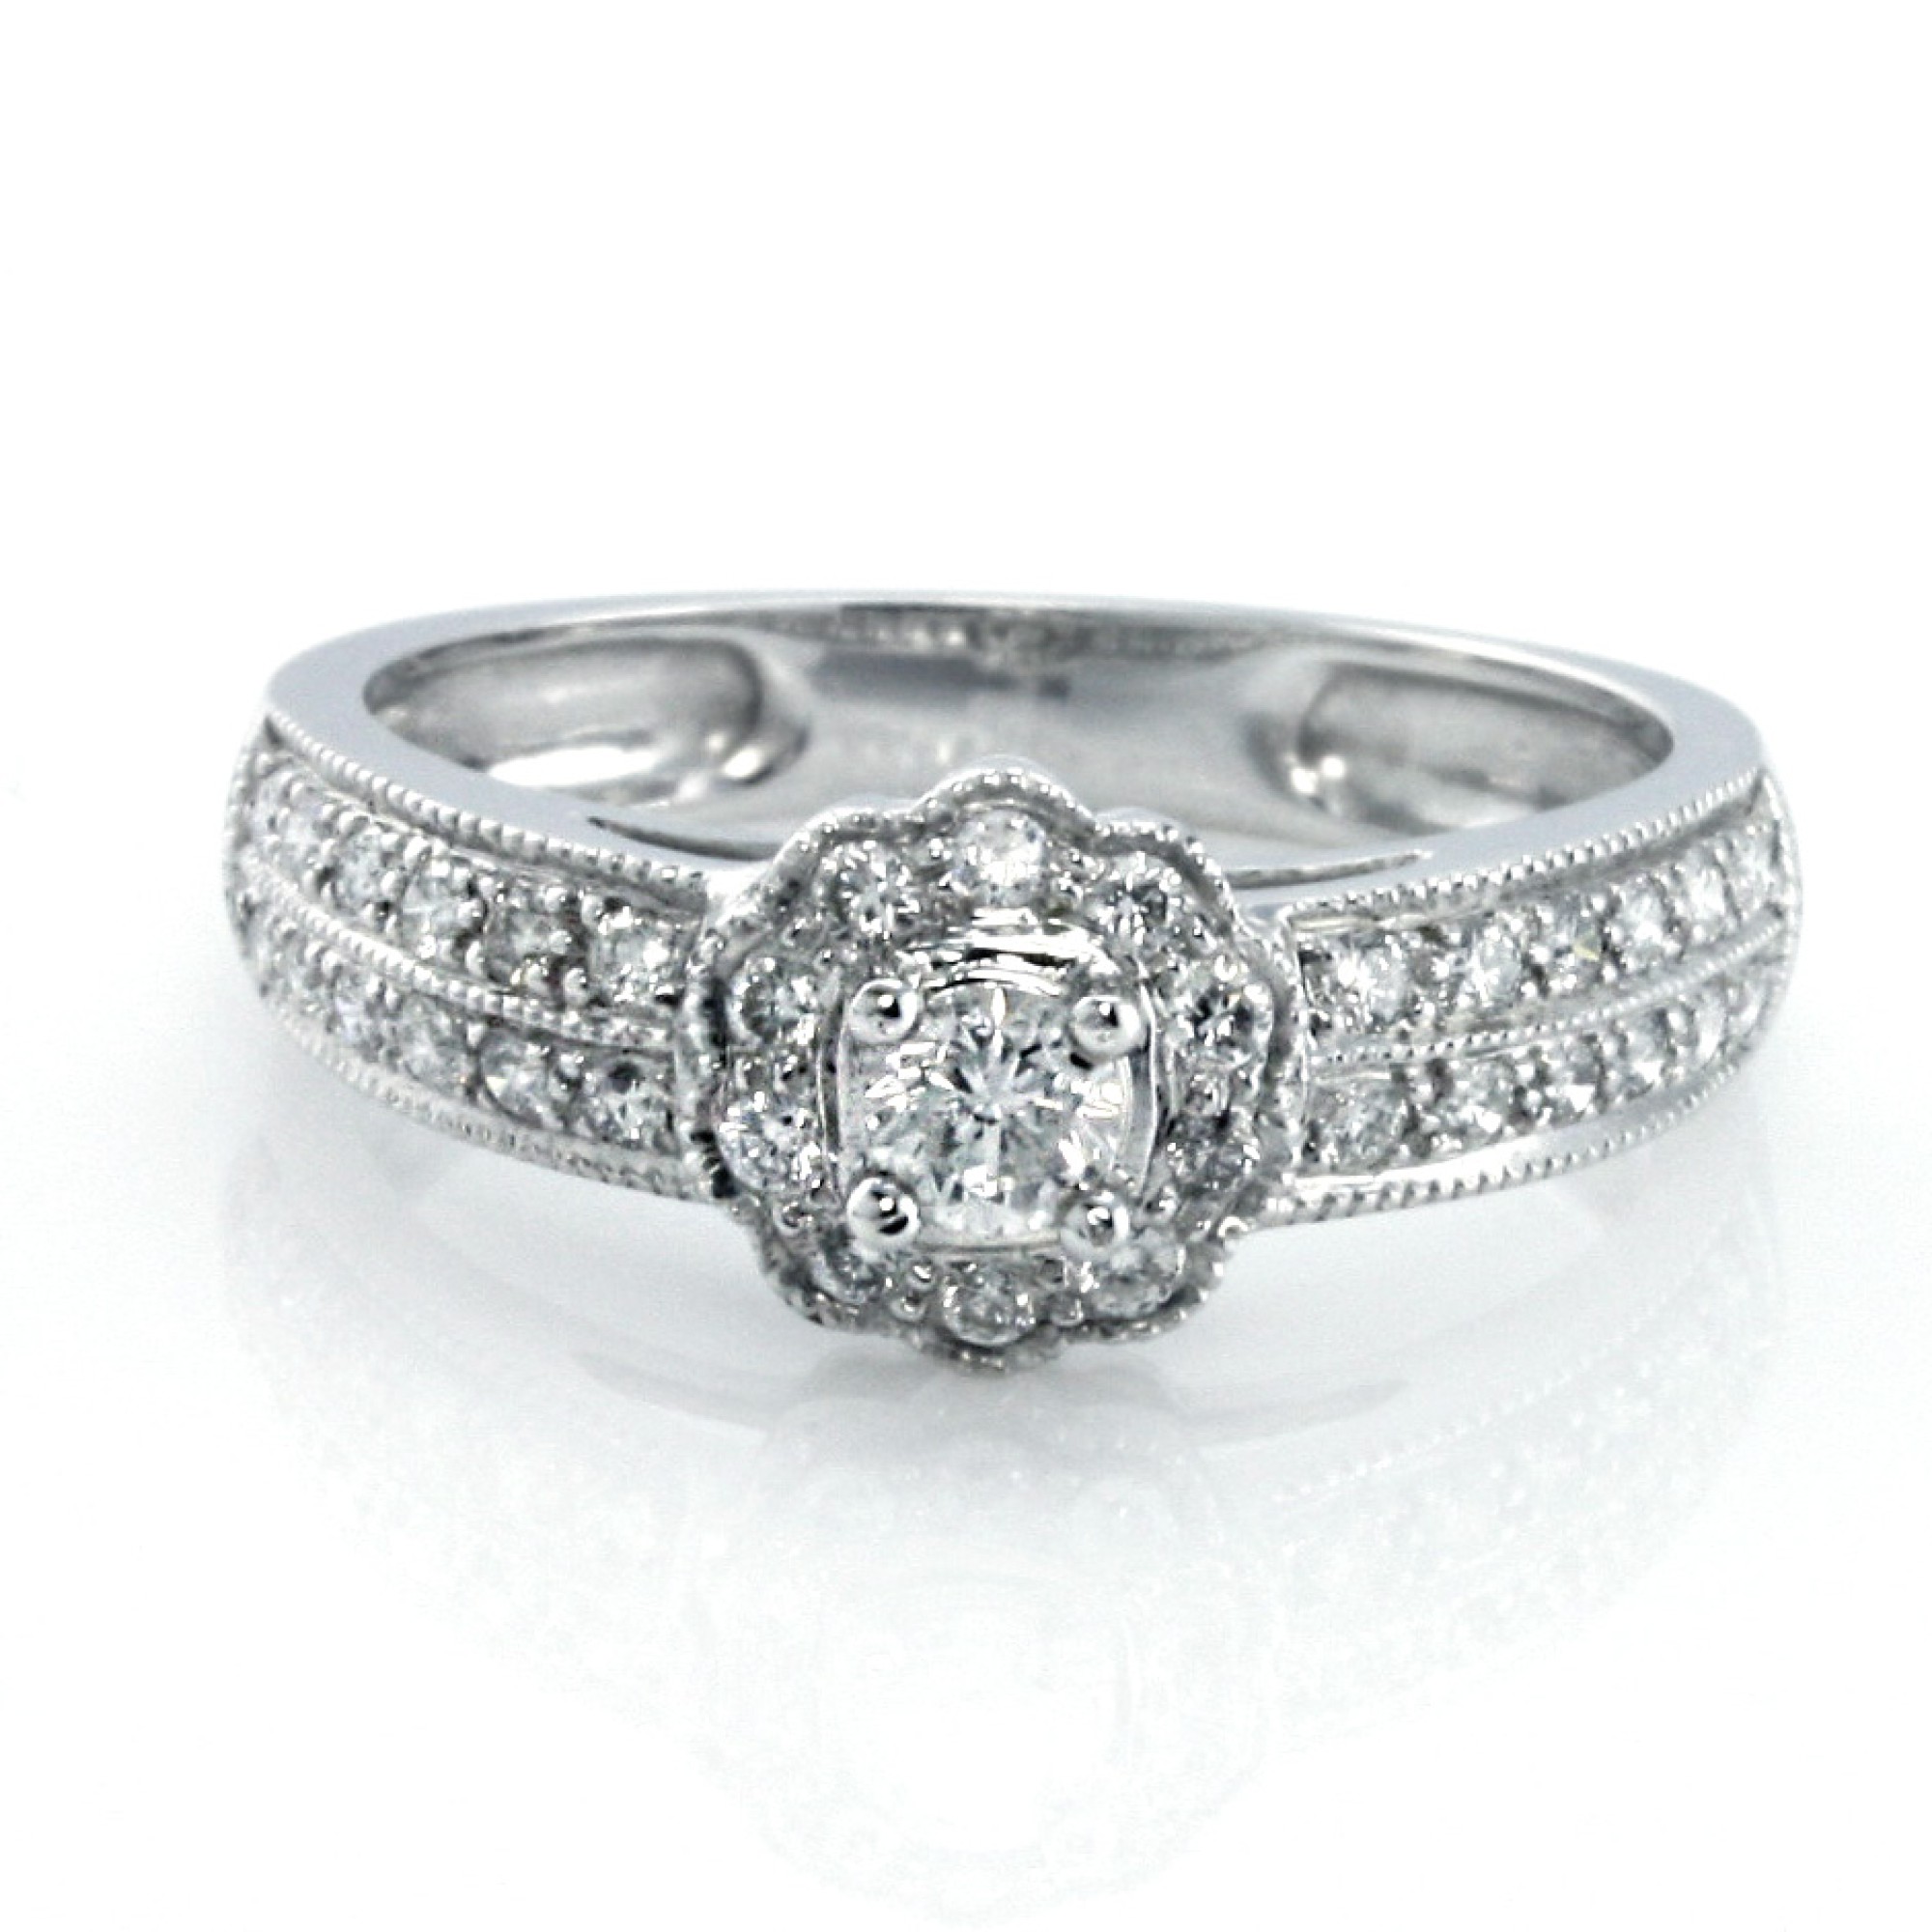 0 50 Cts Round Cut Halo Diamond Engagement Ring Set In 14k White